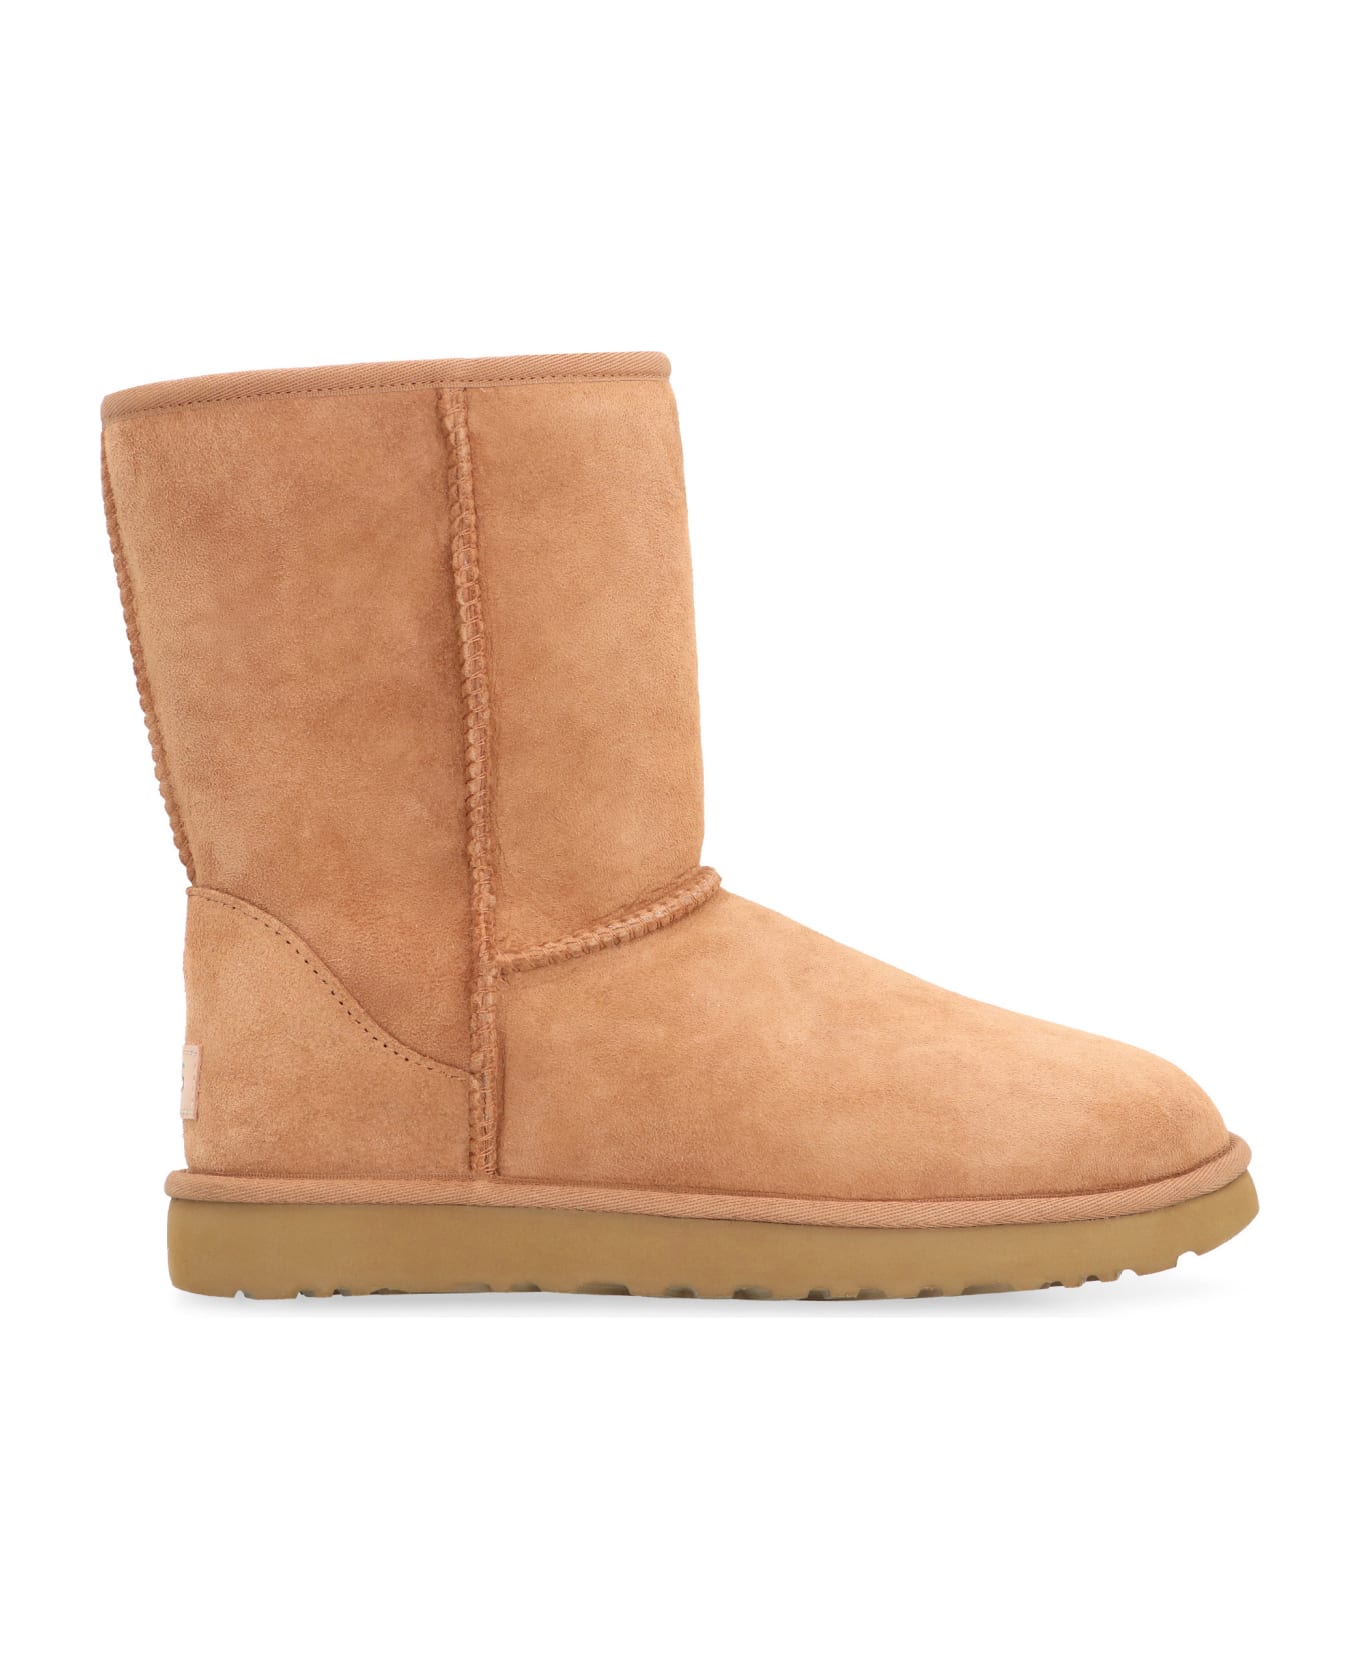 UGG Classic Short Ii Ankle Boots - CHESTNUT ブーツ